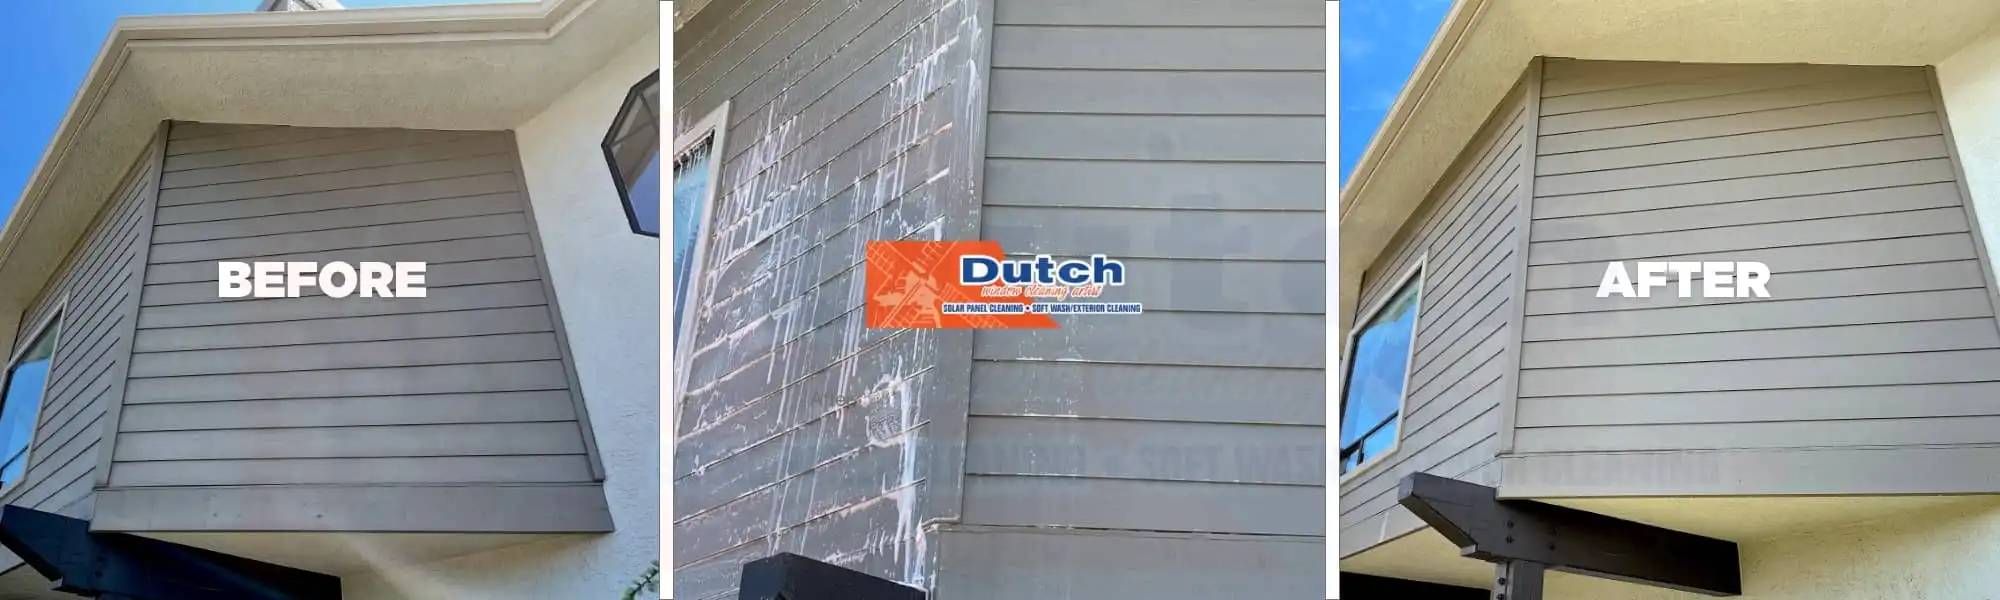 Dutch Window Cleaning Artist How We Clean UV Damaged Surfaces